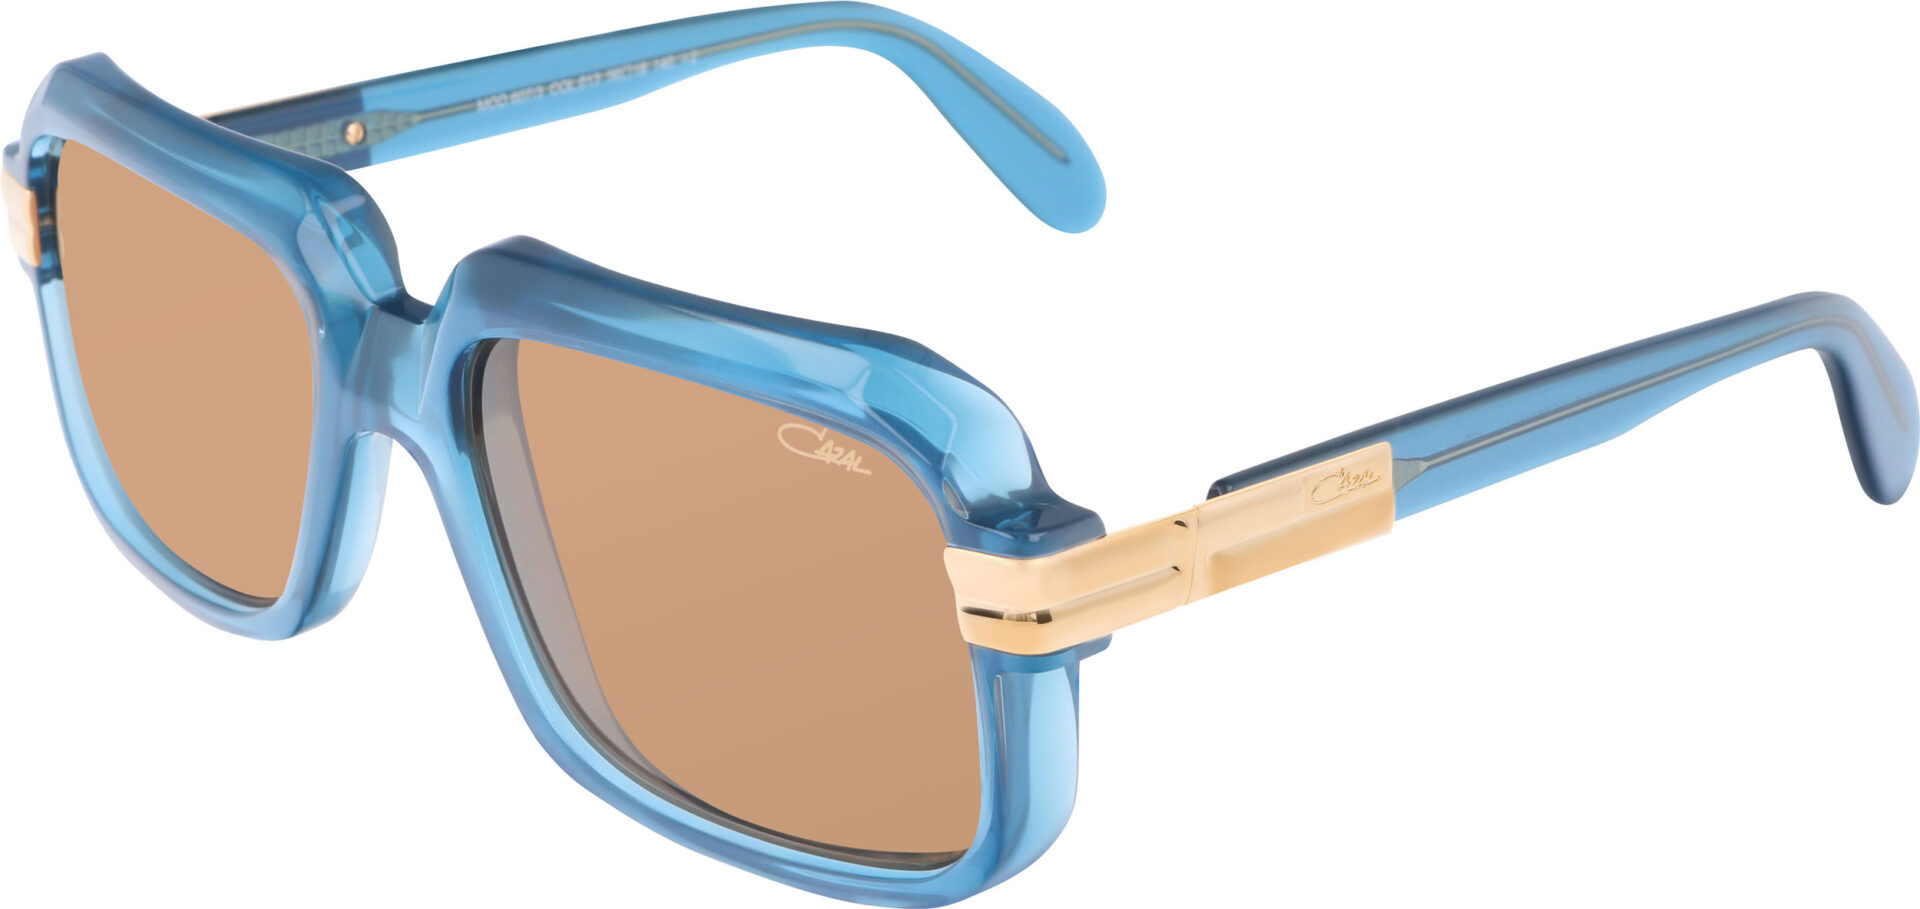 Blue Plastic Frame With Brown Shades